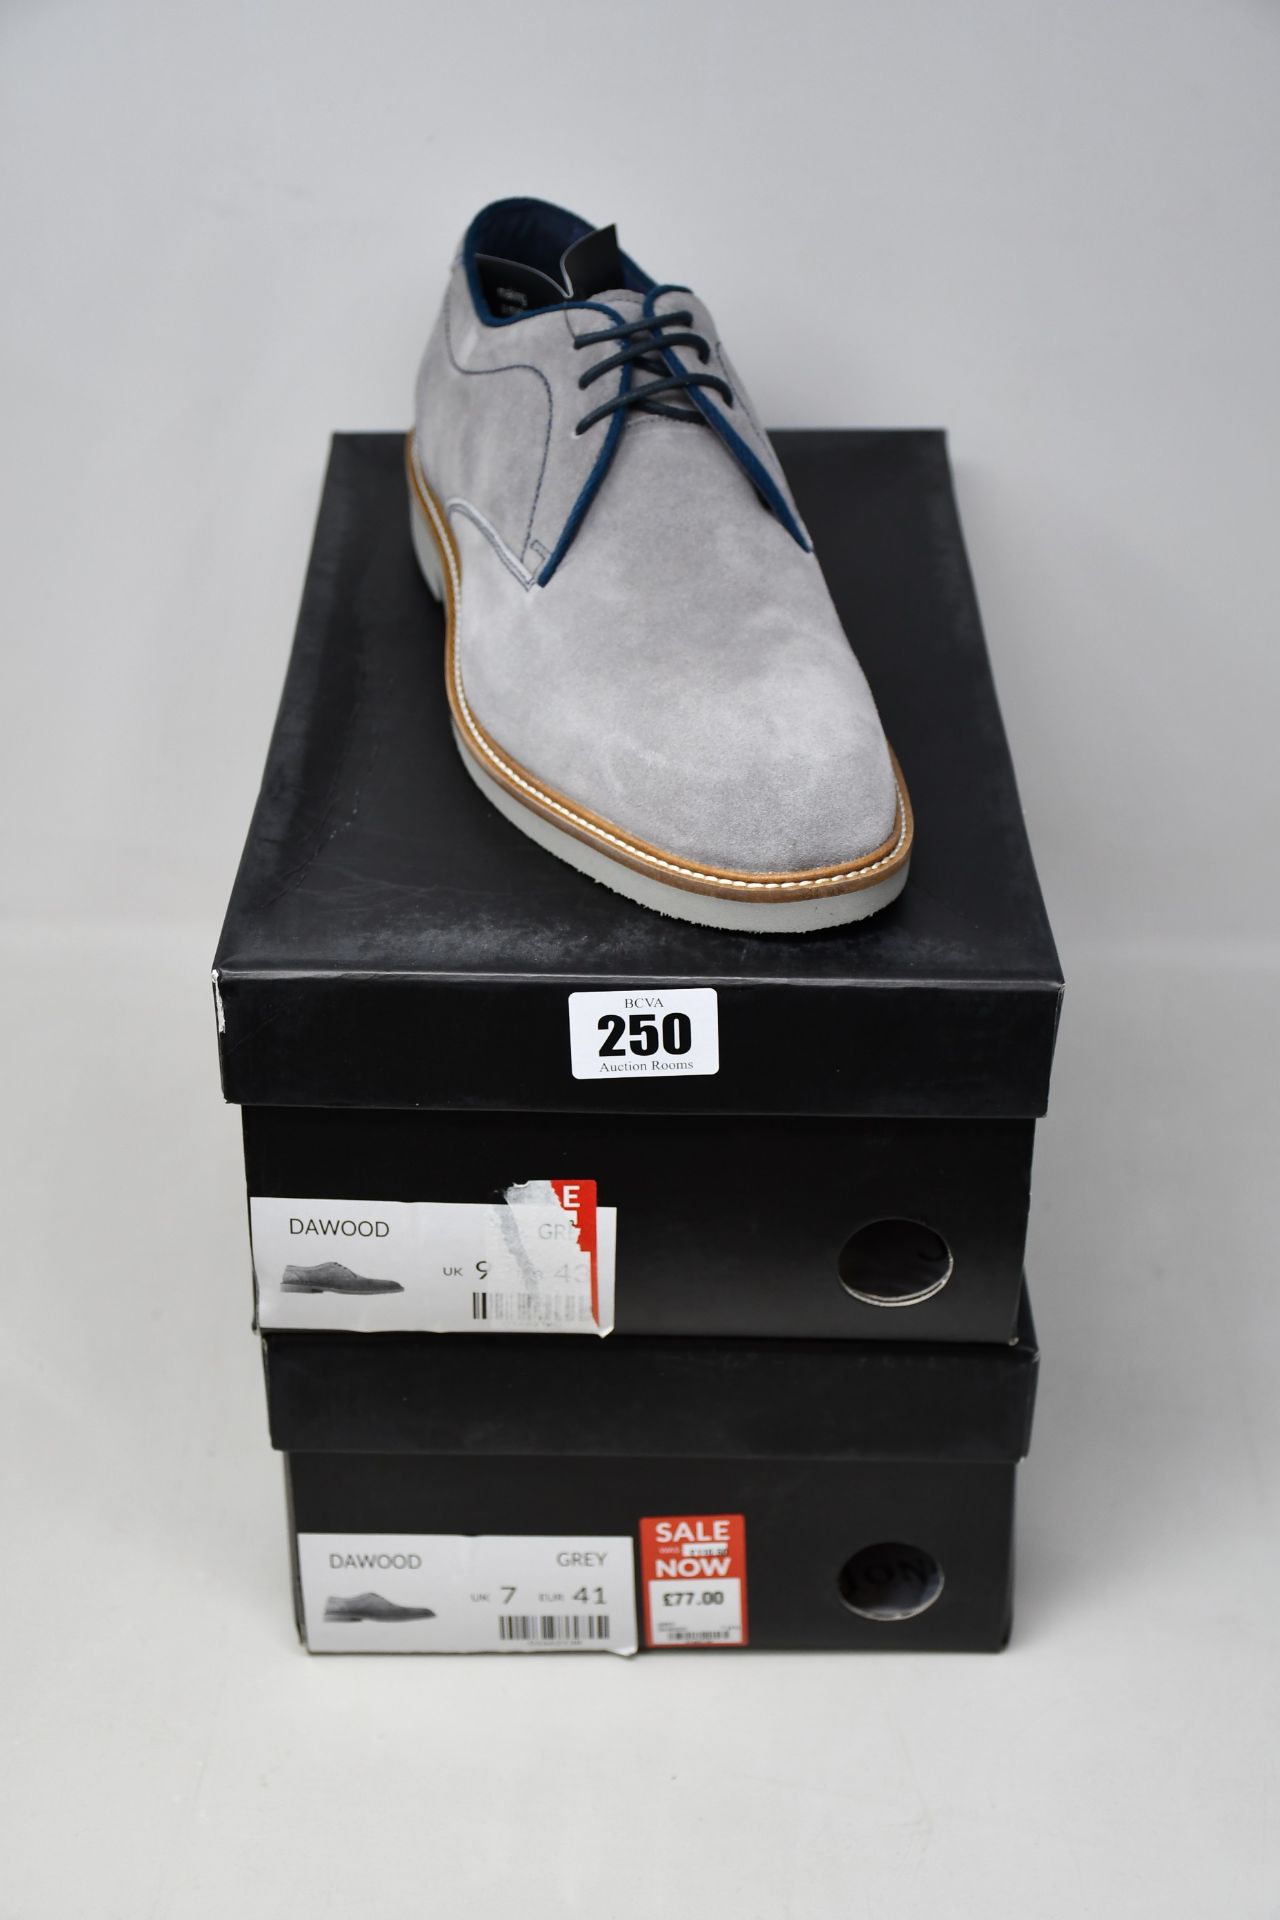 Two pairs of as new Jones Bootmaker Dawood shoes in grey suede (UK 7, 9 - RRP £77 each).